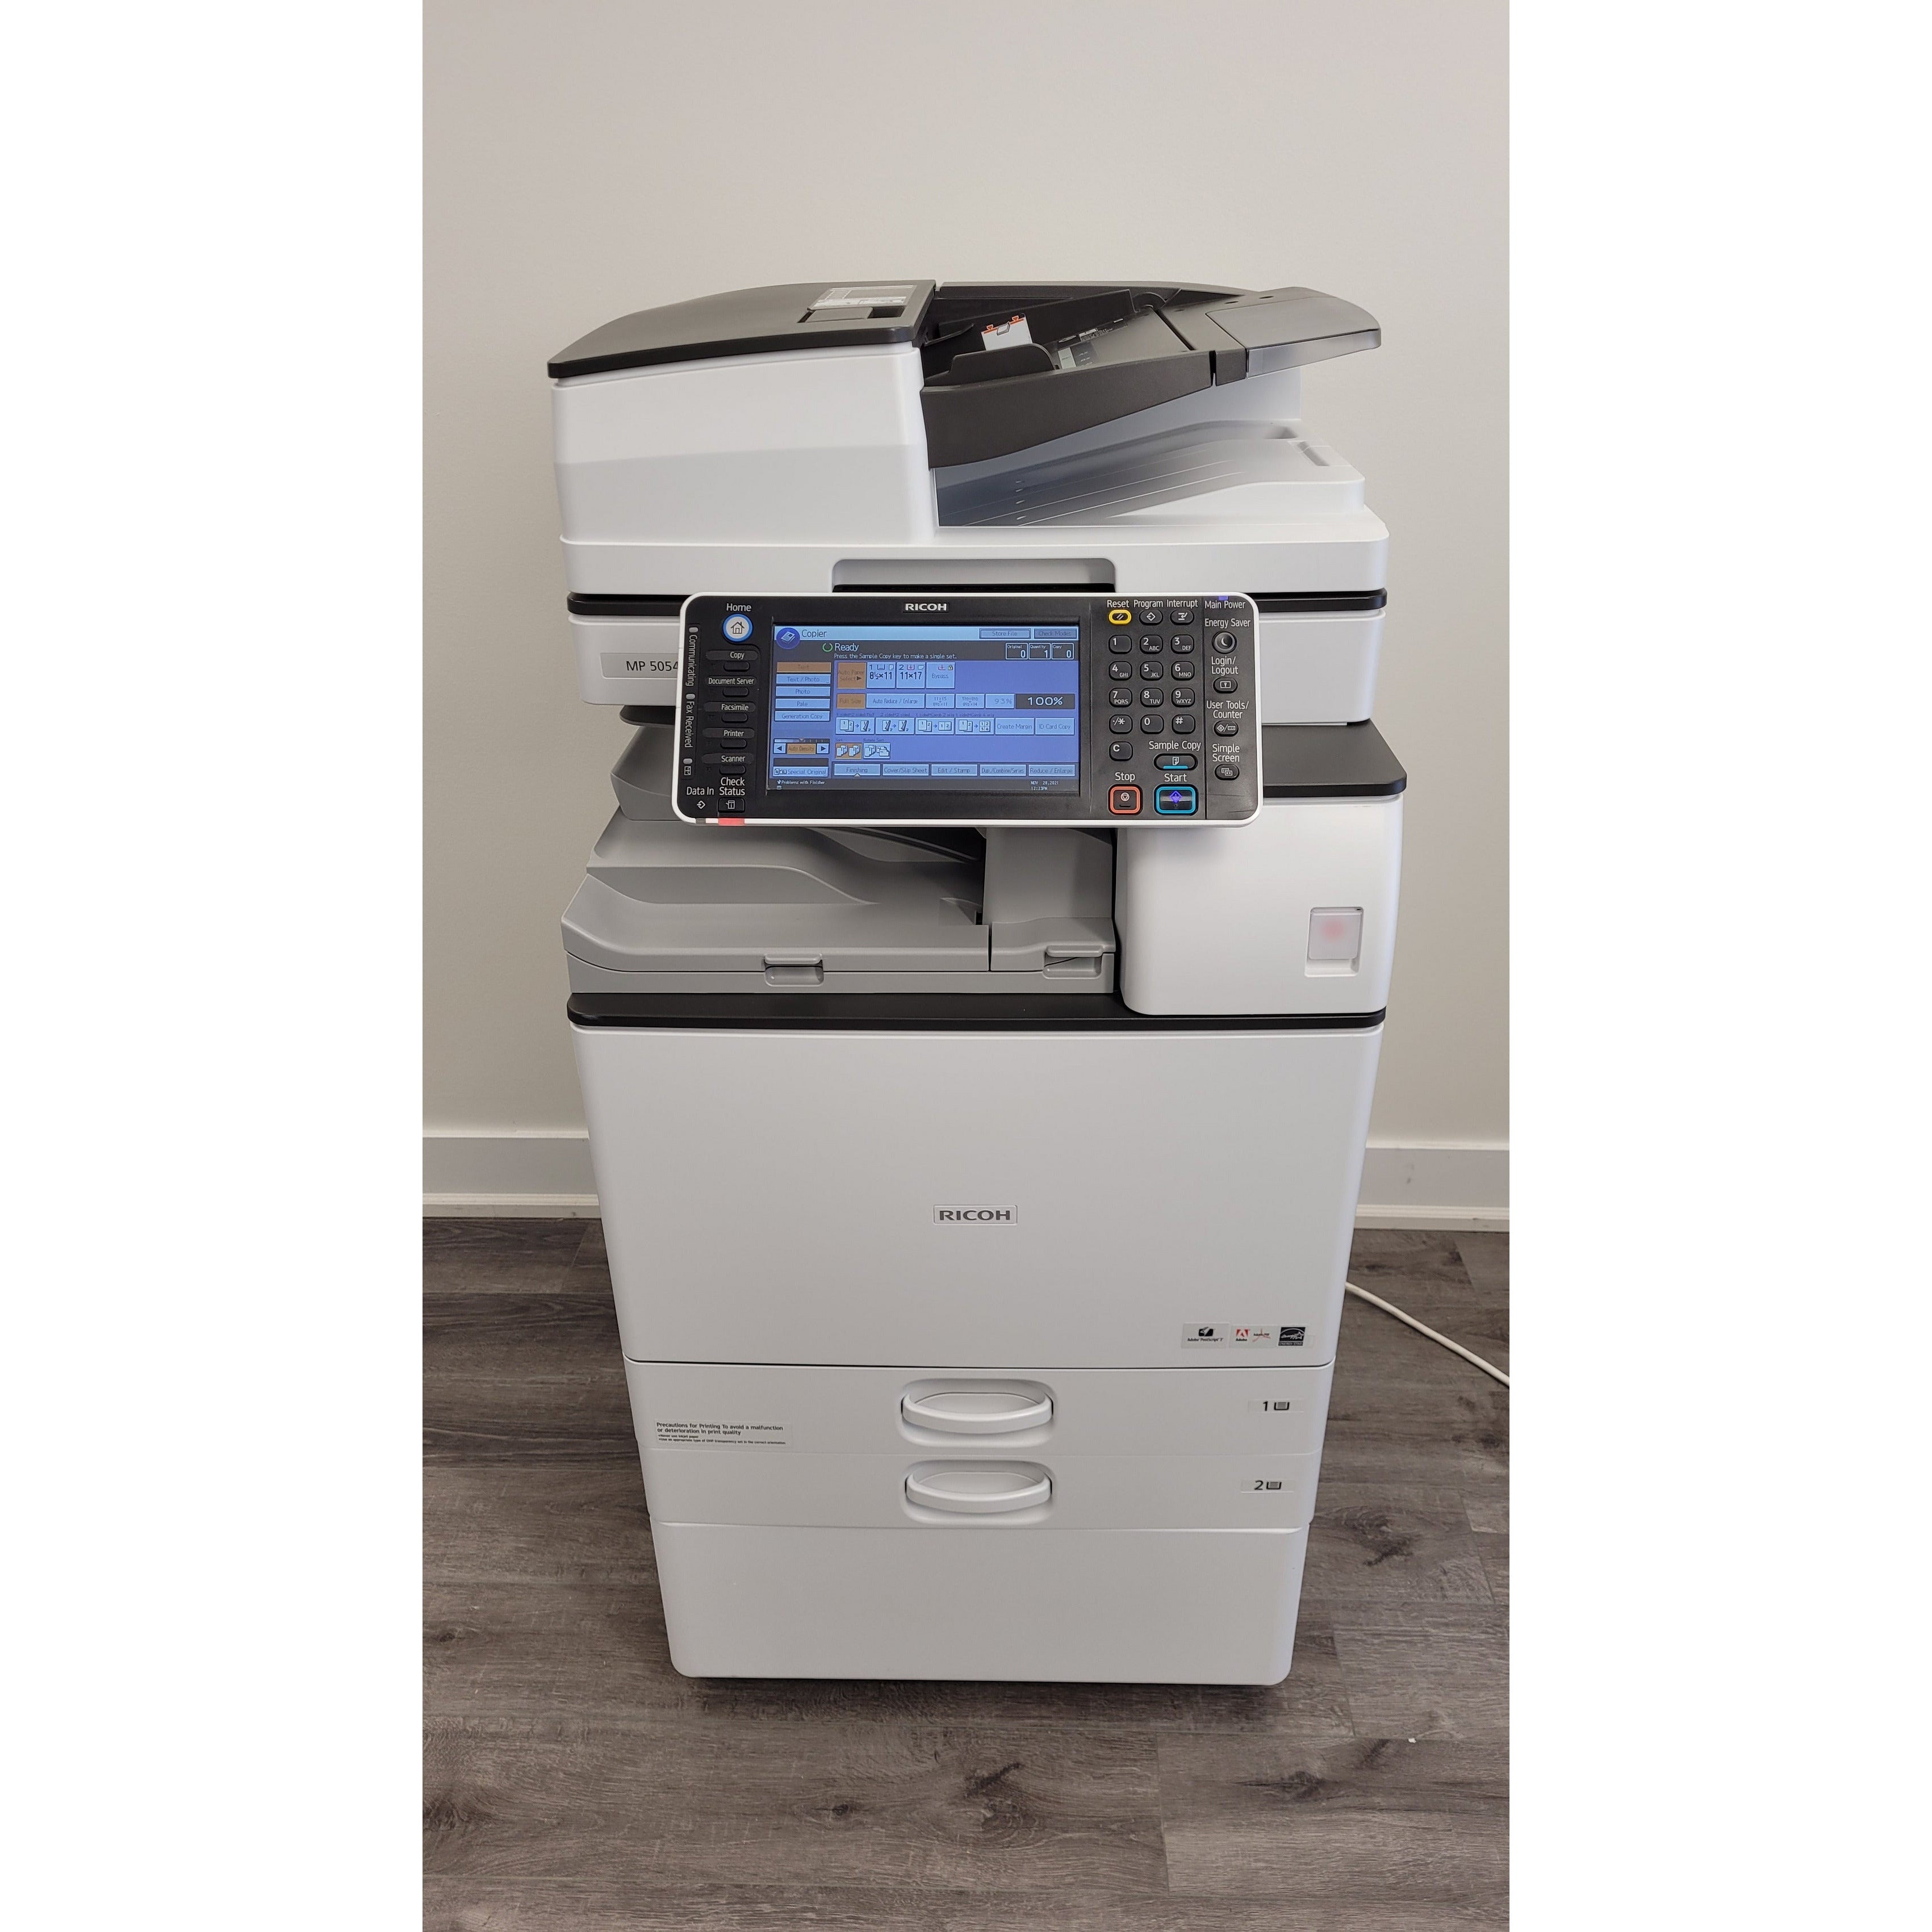 Ricoh MP 5054 B/W Copier Laser Multifunction Printer Fast Printing For Office